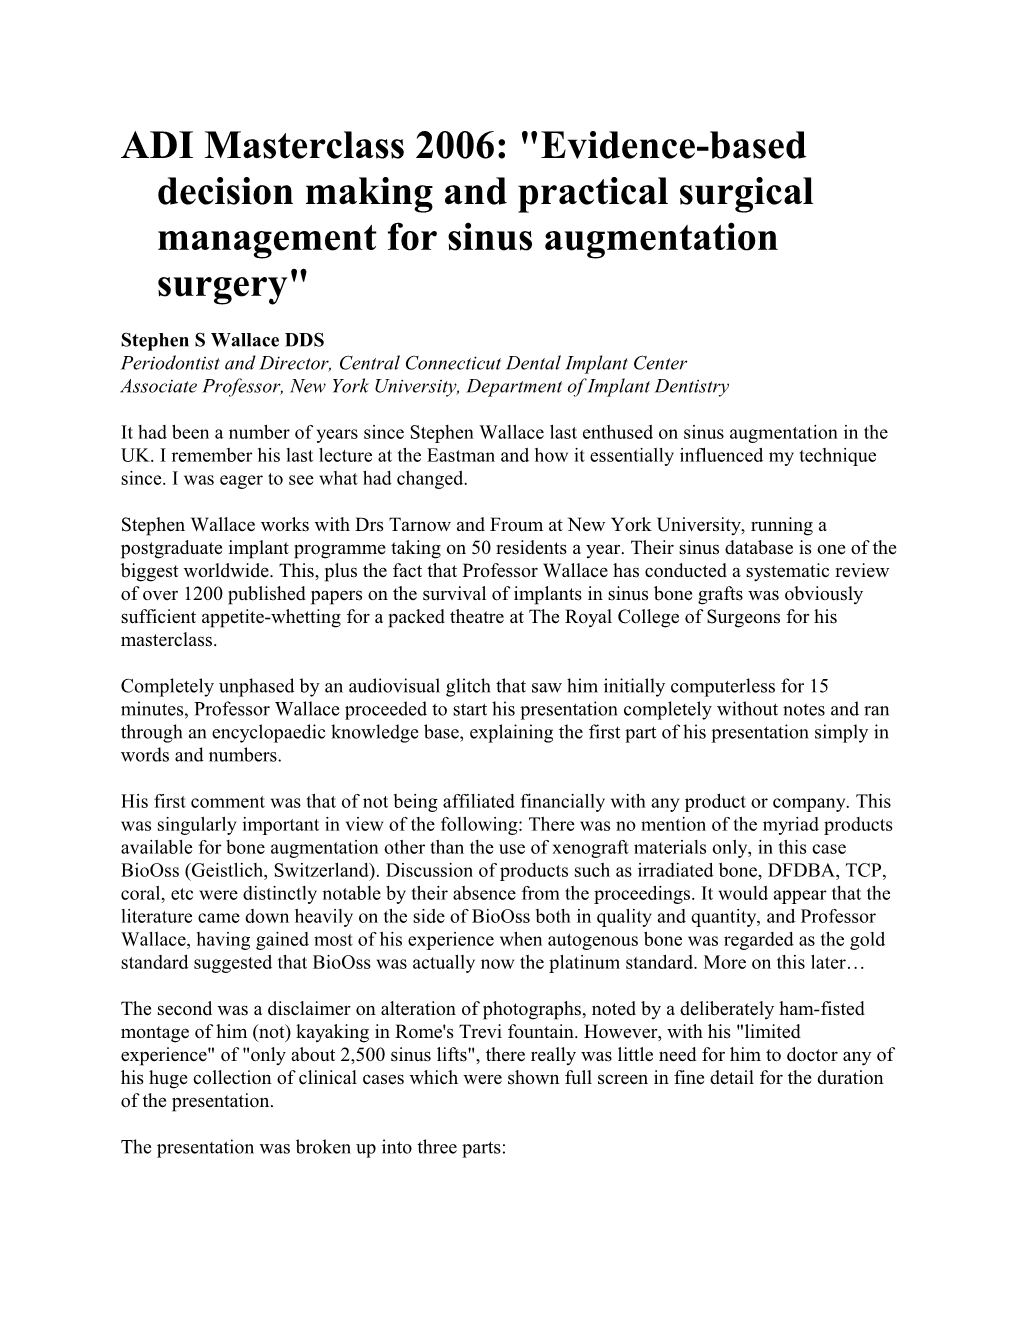 ADI Masterclass 2006: Evidence-Based Decision Making and Practical Surgical Management